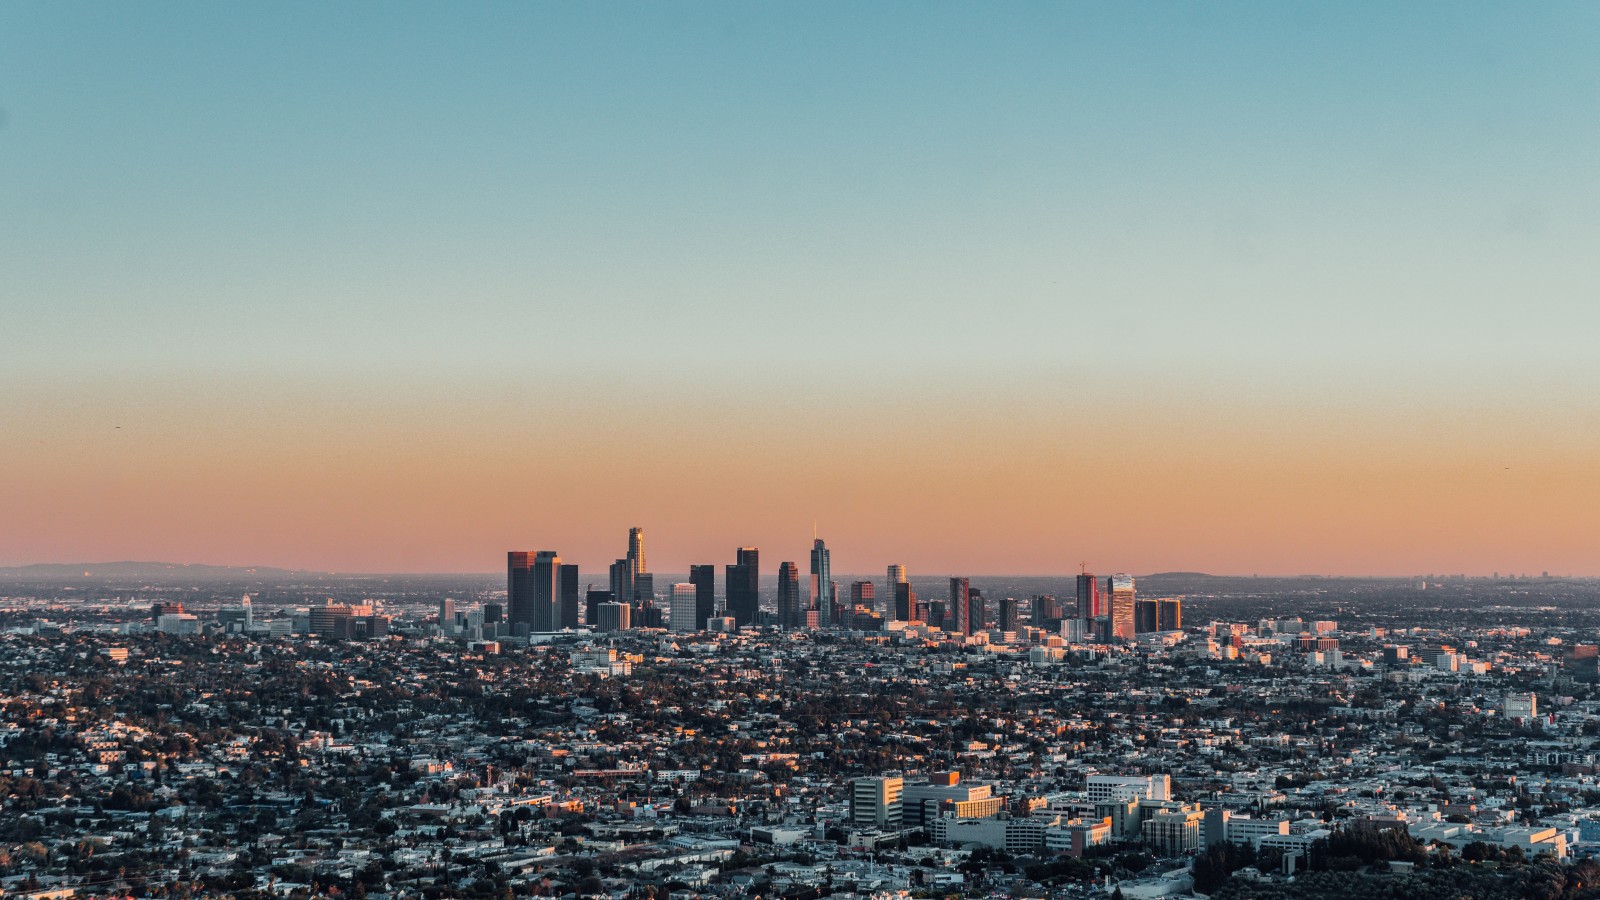 City view of Los Angeles, California